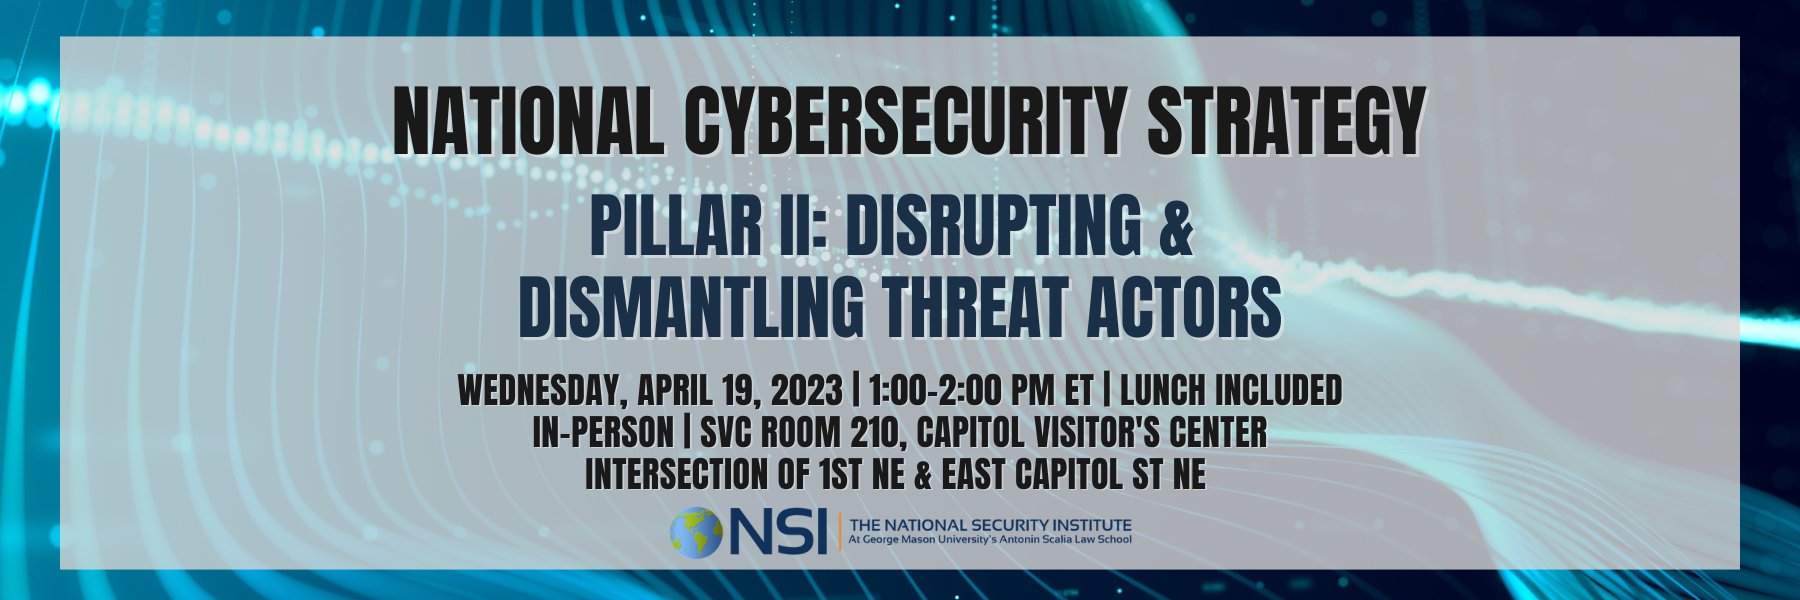 National Cybersecurity Strategy Pillar II: Disrupt and Dismantle Threat Actors